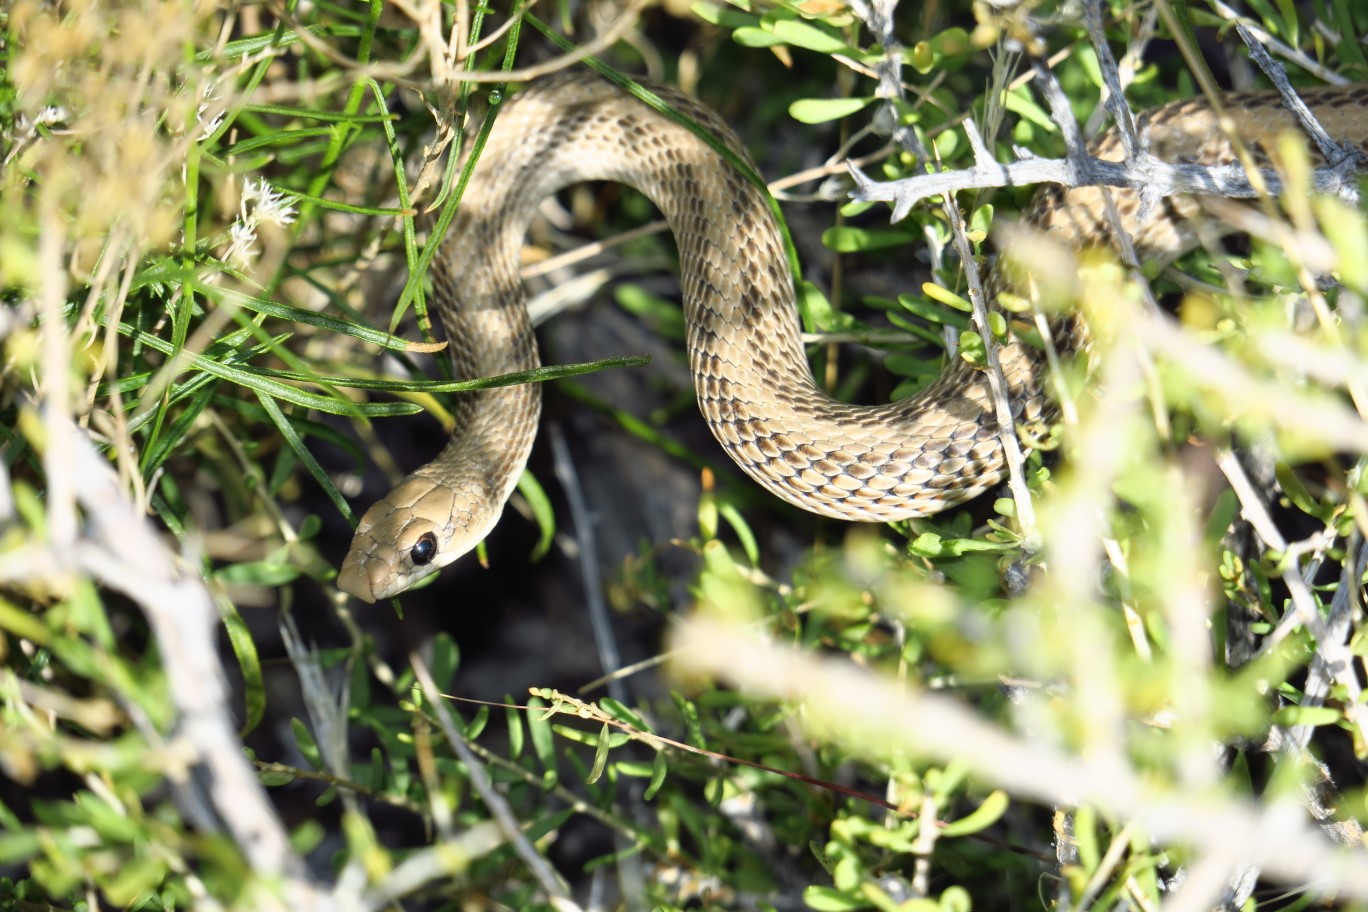 06-Mojave_Patch-Nosed_Snake_meandering_through_shrubs